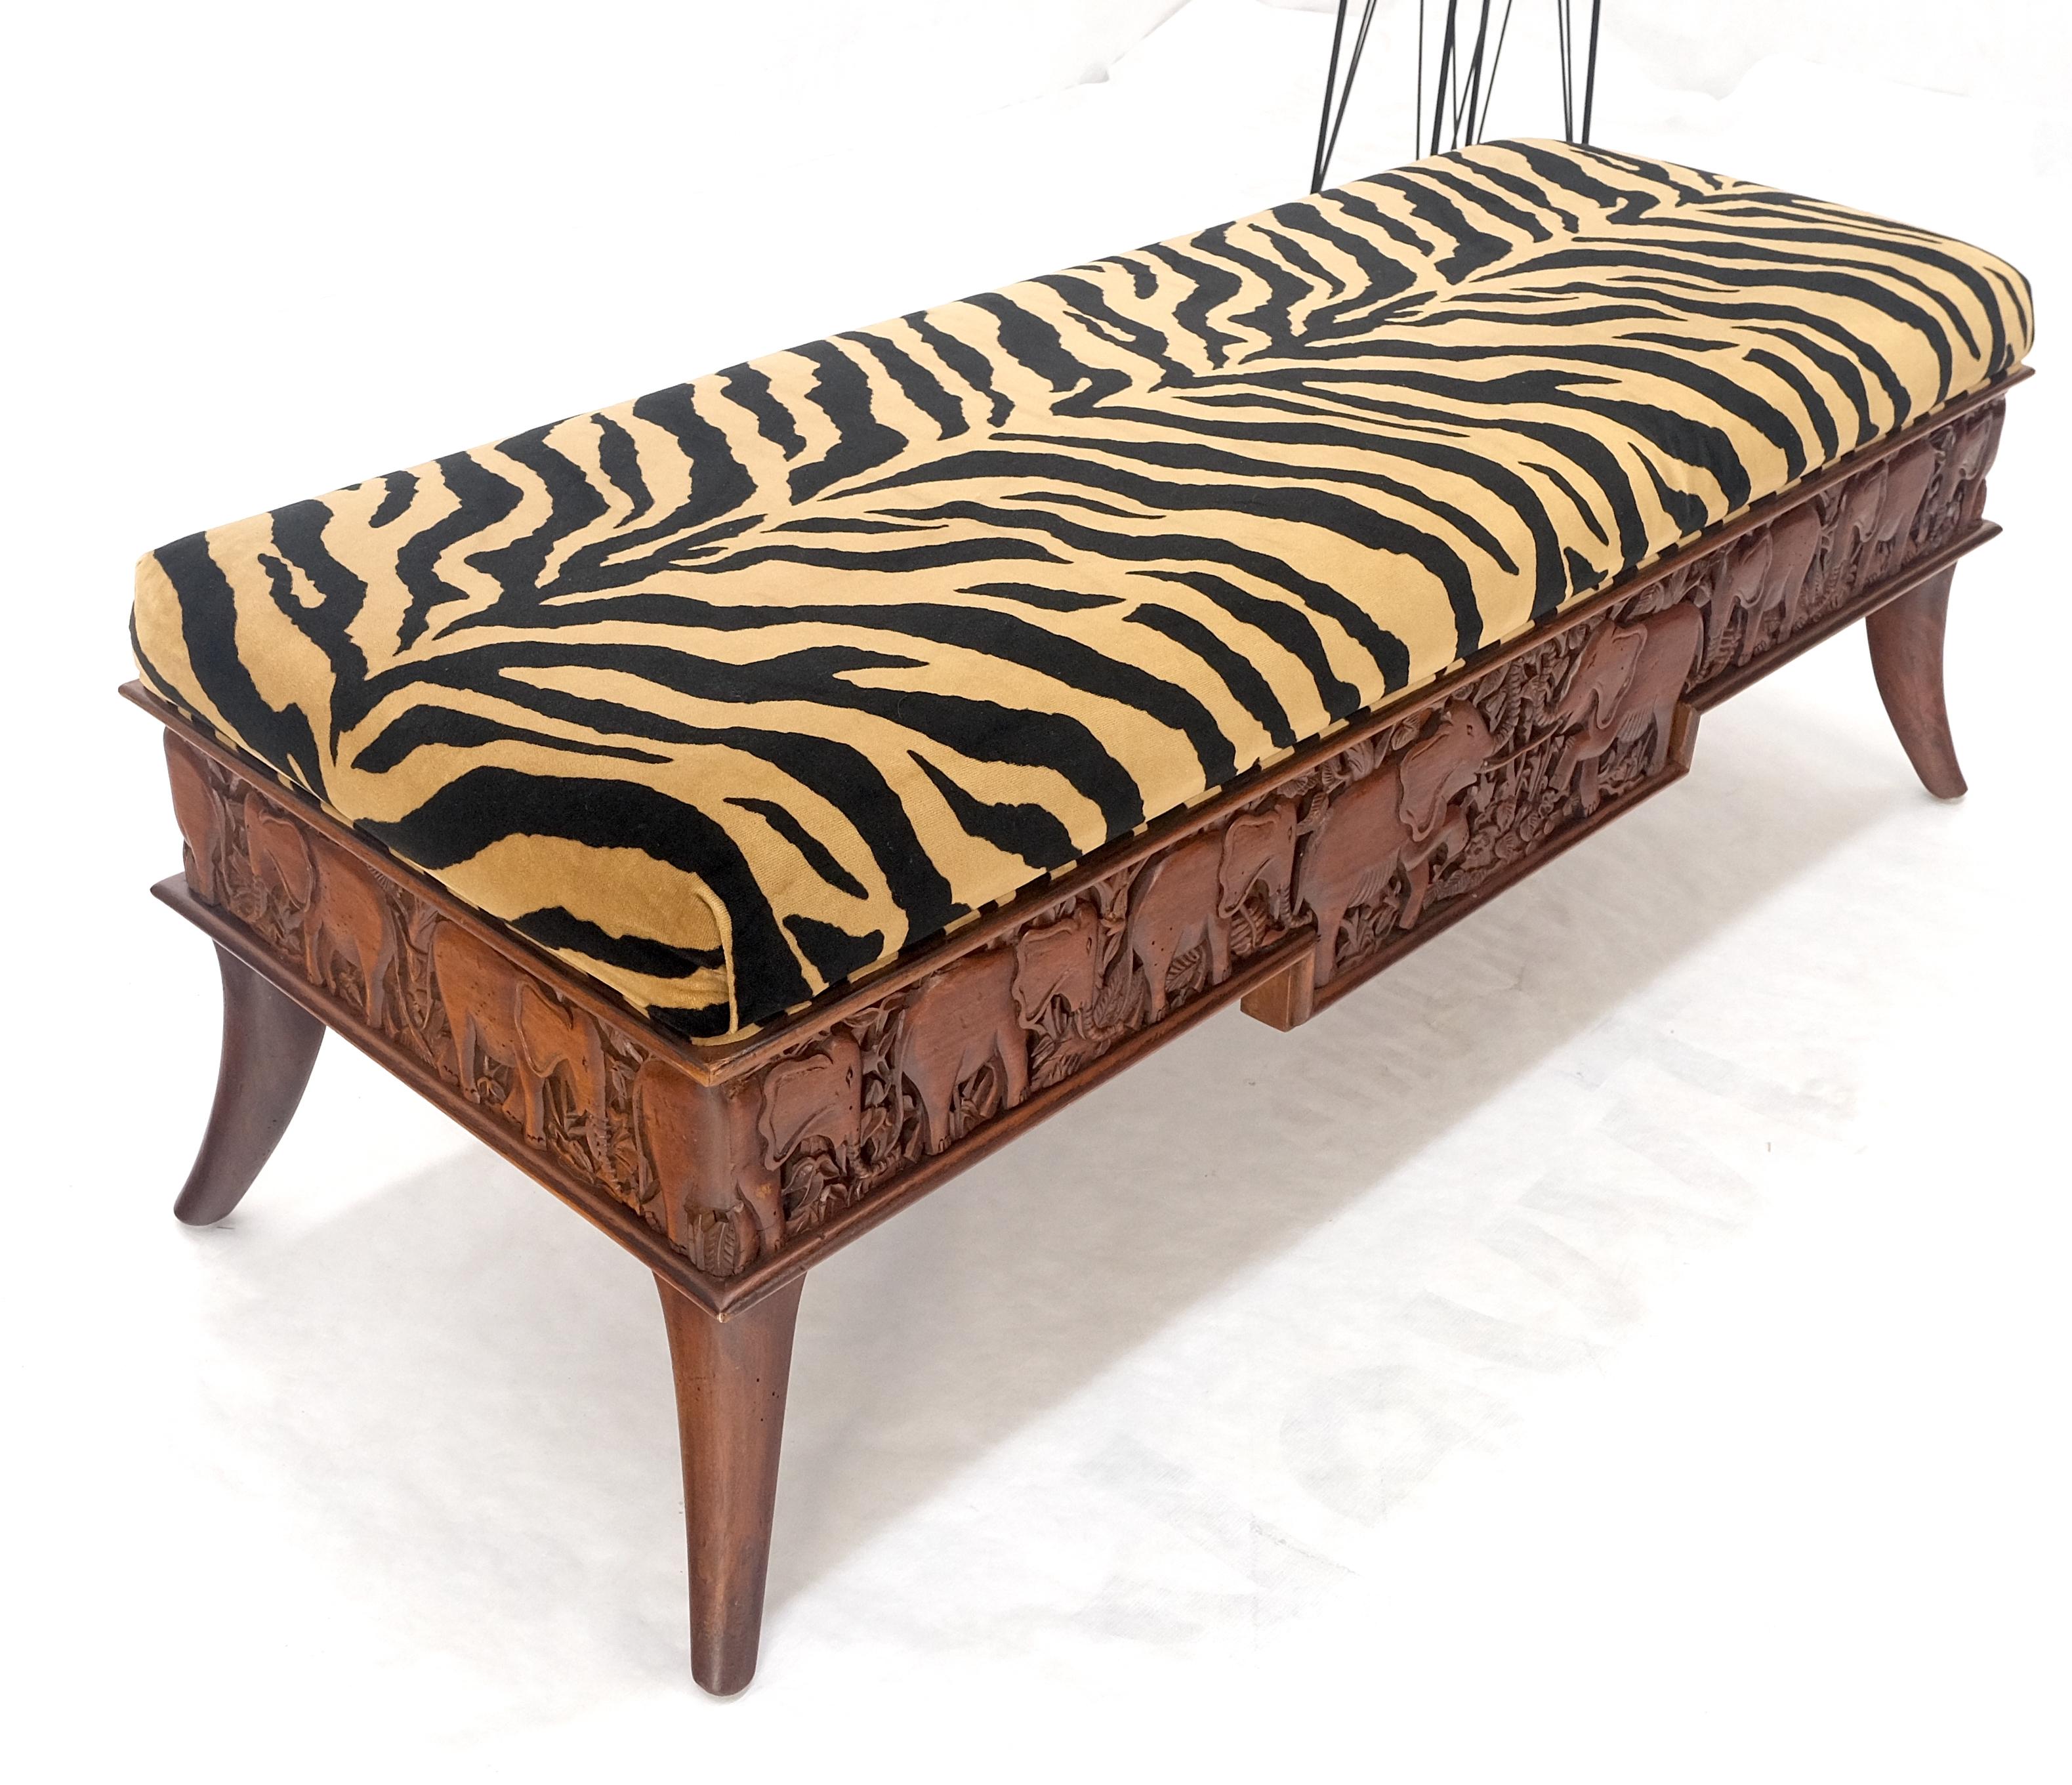 Lacquered Heavy Solid Carved Elephants Teak Base Tiger Upholstery Horn Leg Bench MINT! For Sale